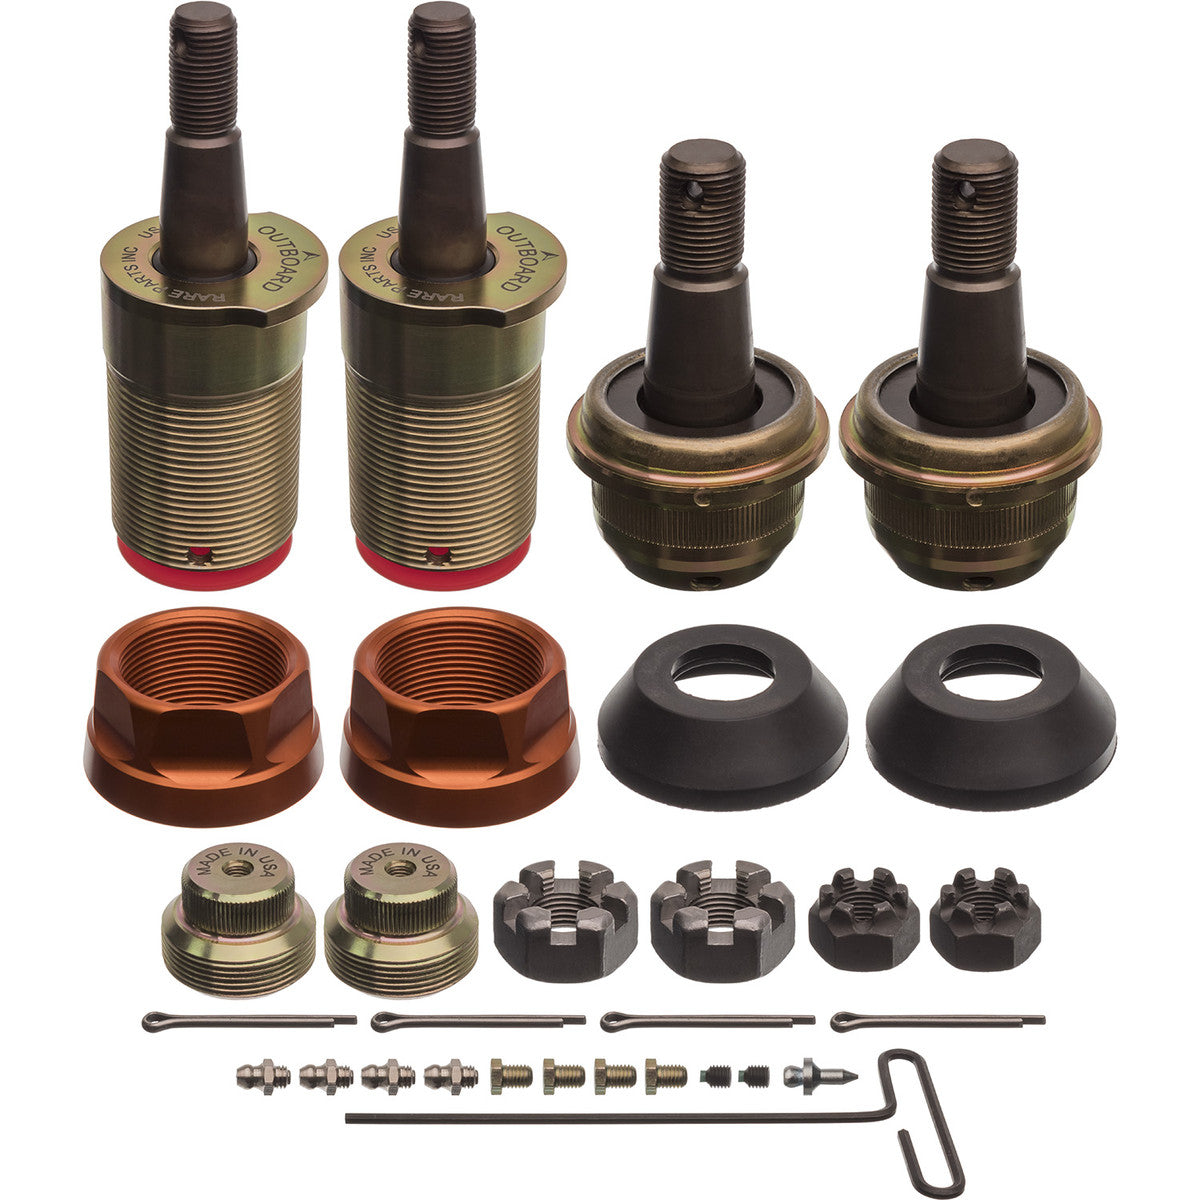 DUAL LOAD CARRYING BALL JOINT KIT (JK)